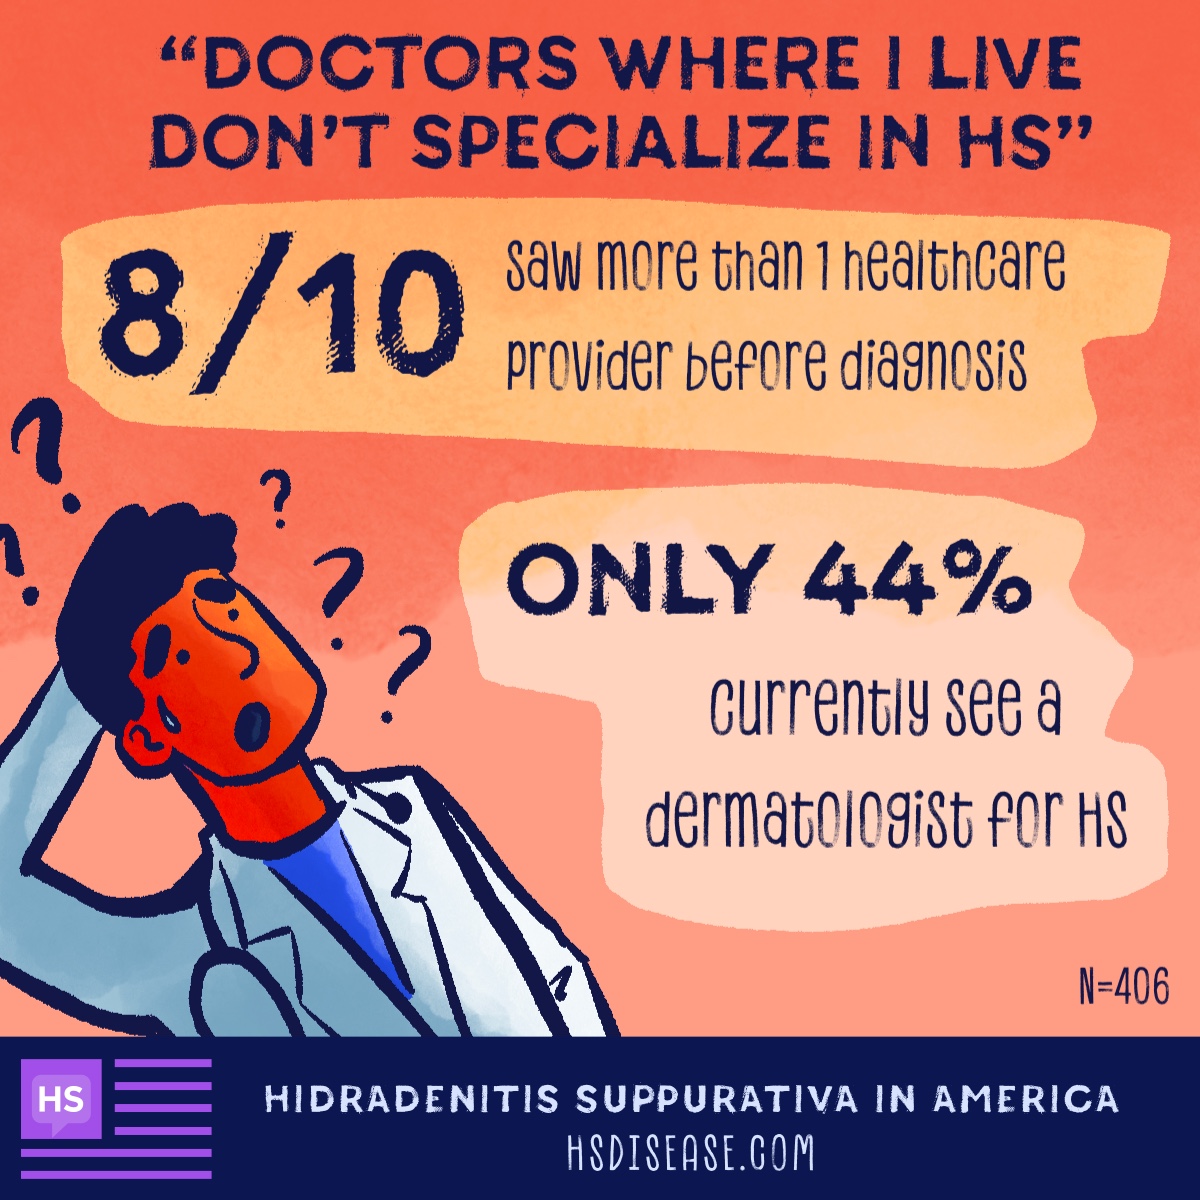 Of those surveyed, 8/10 saw more than 1 healthcare provider before their diagnosis and only 44% currently see a dermatologist. One community member says “Doctors where I live don’t specialize in HS.”